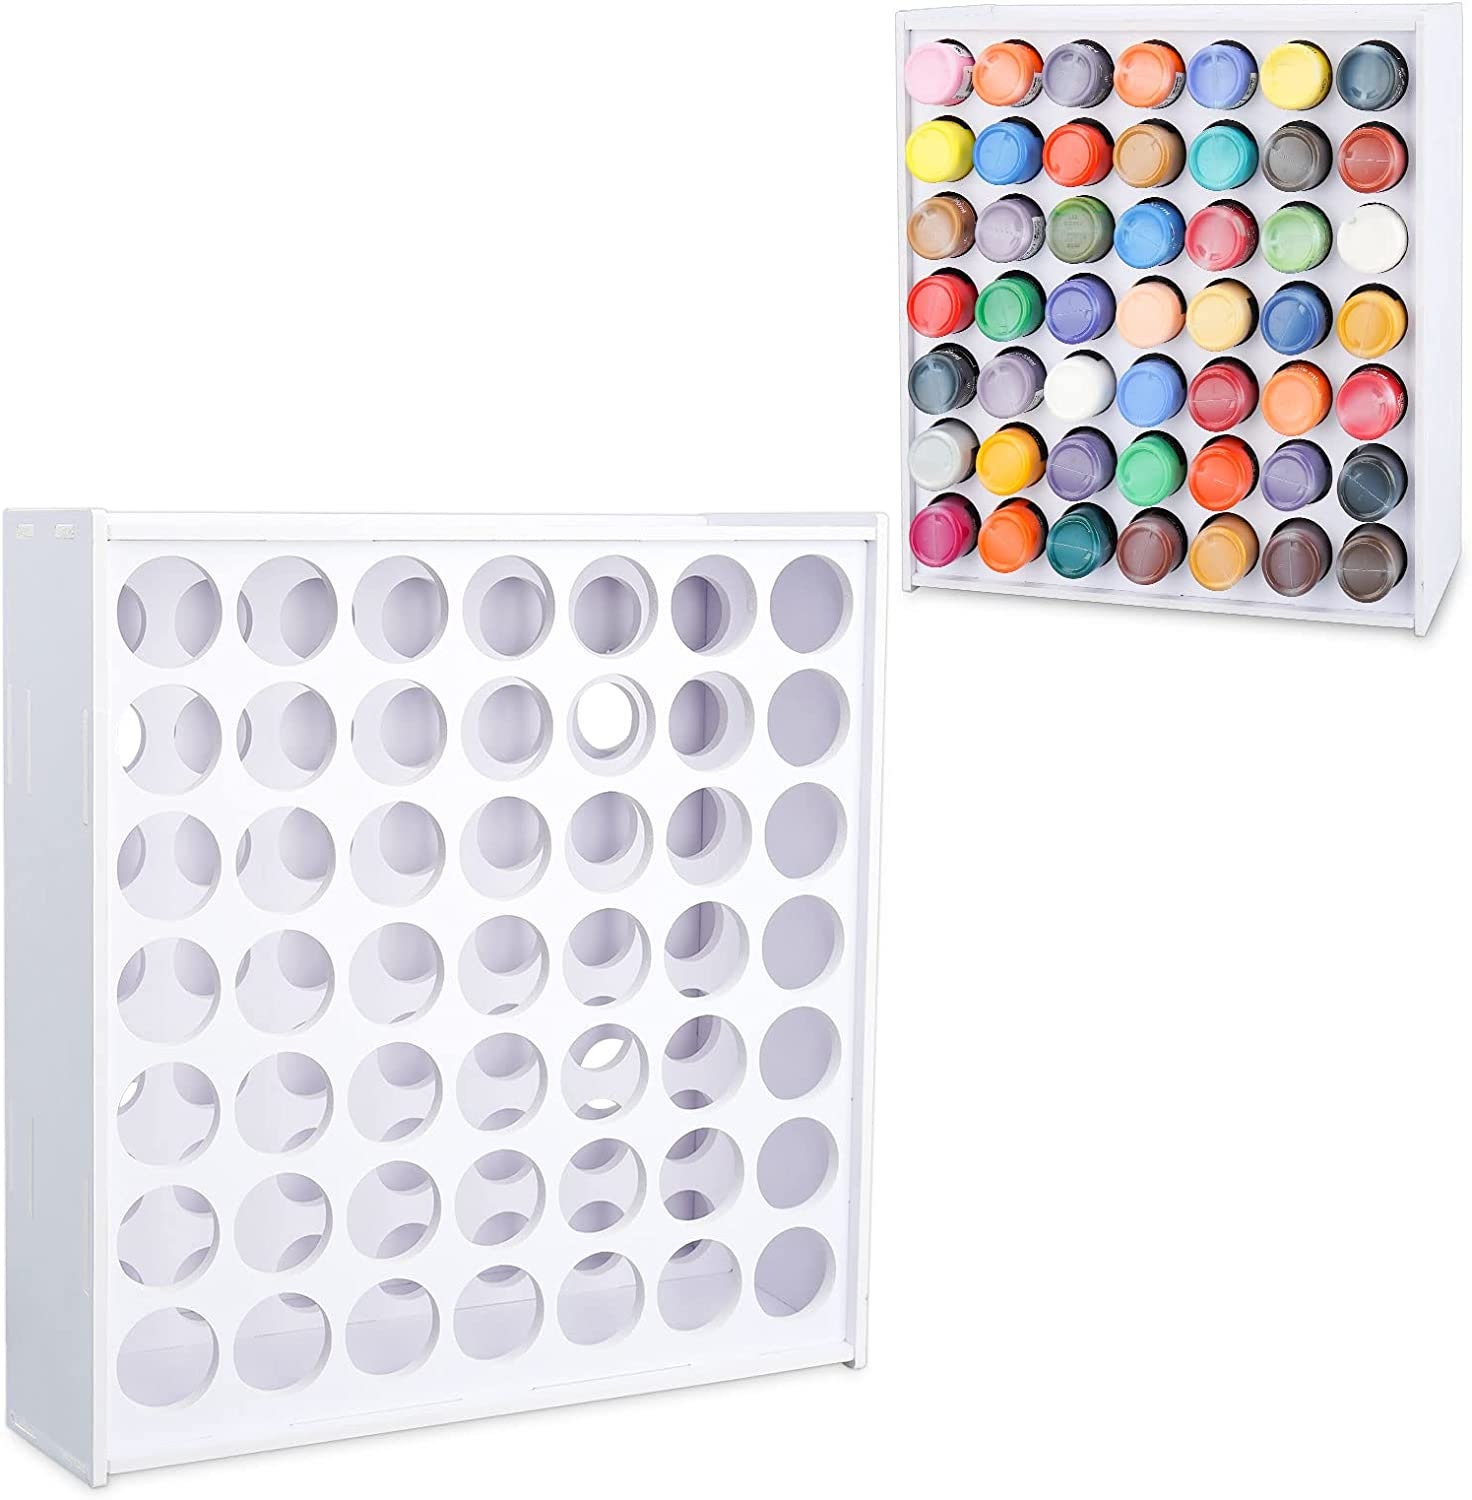 3-Tier Spinning Paint Organizer Rack for 48 Bottles, Rotating Tower Craft Paint